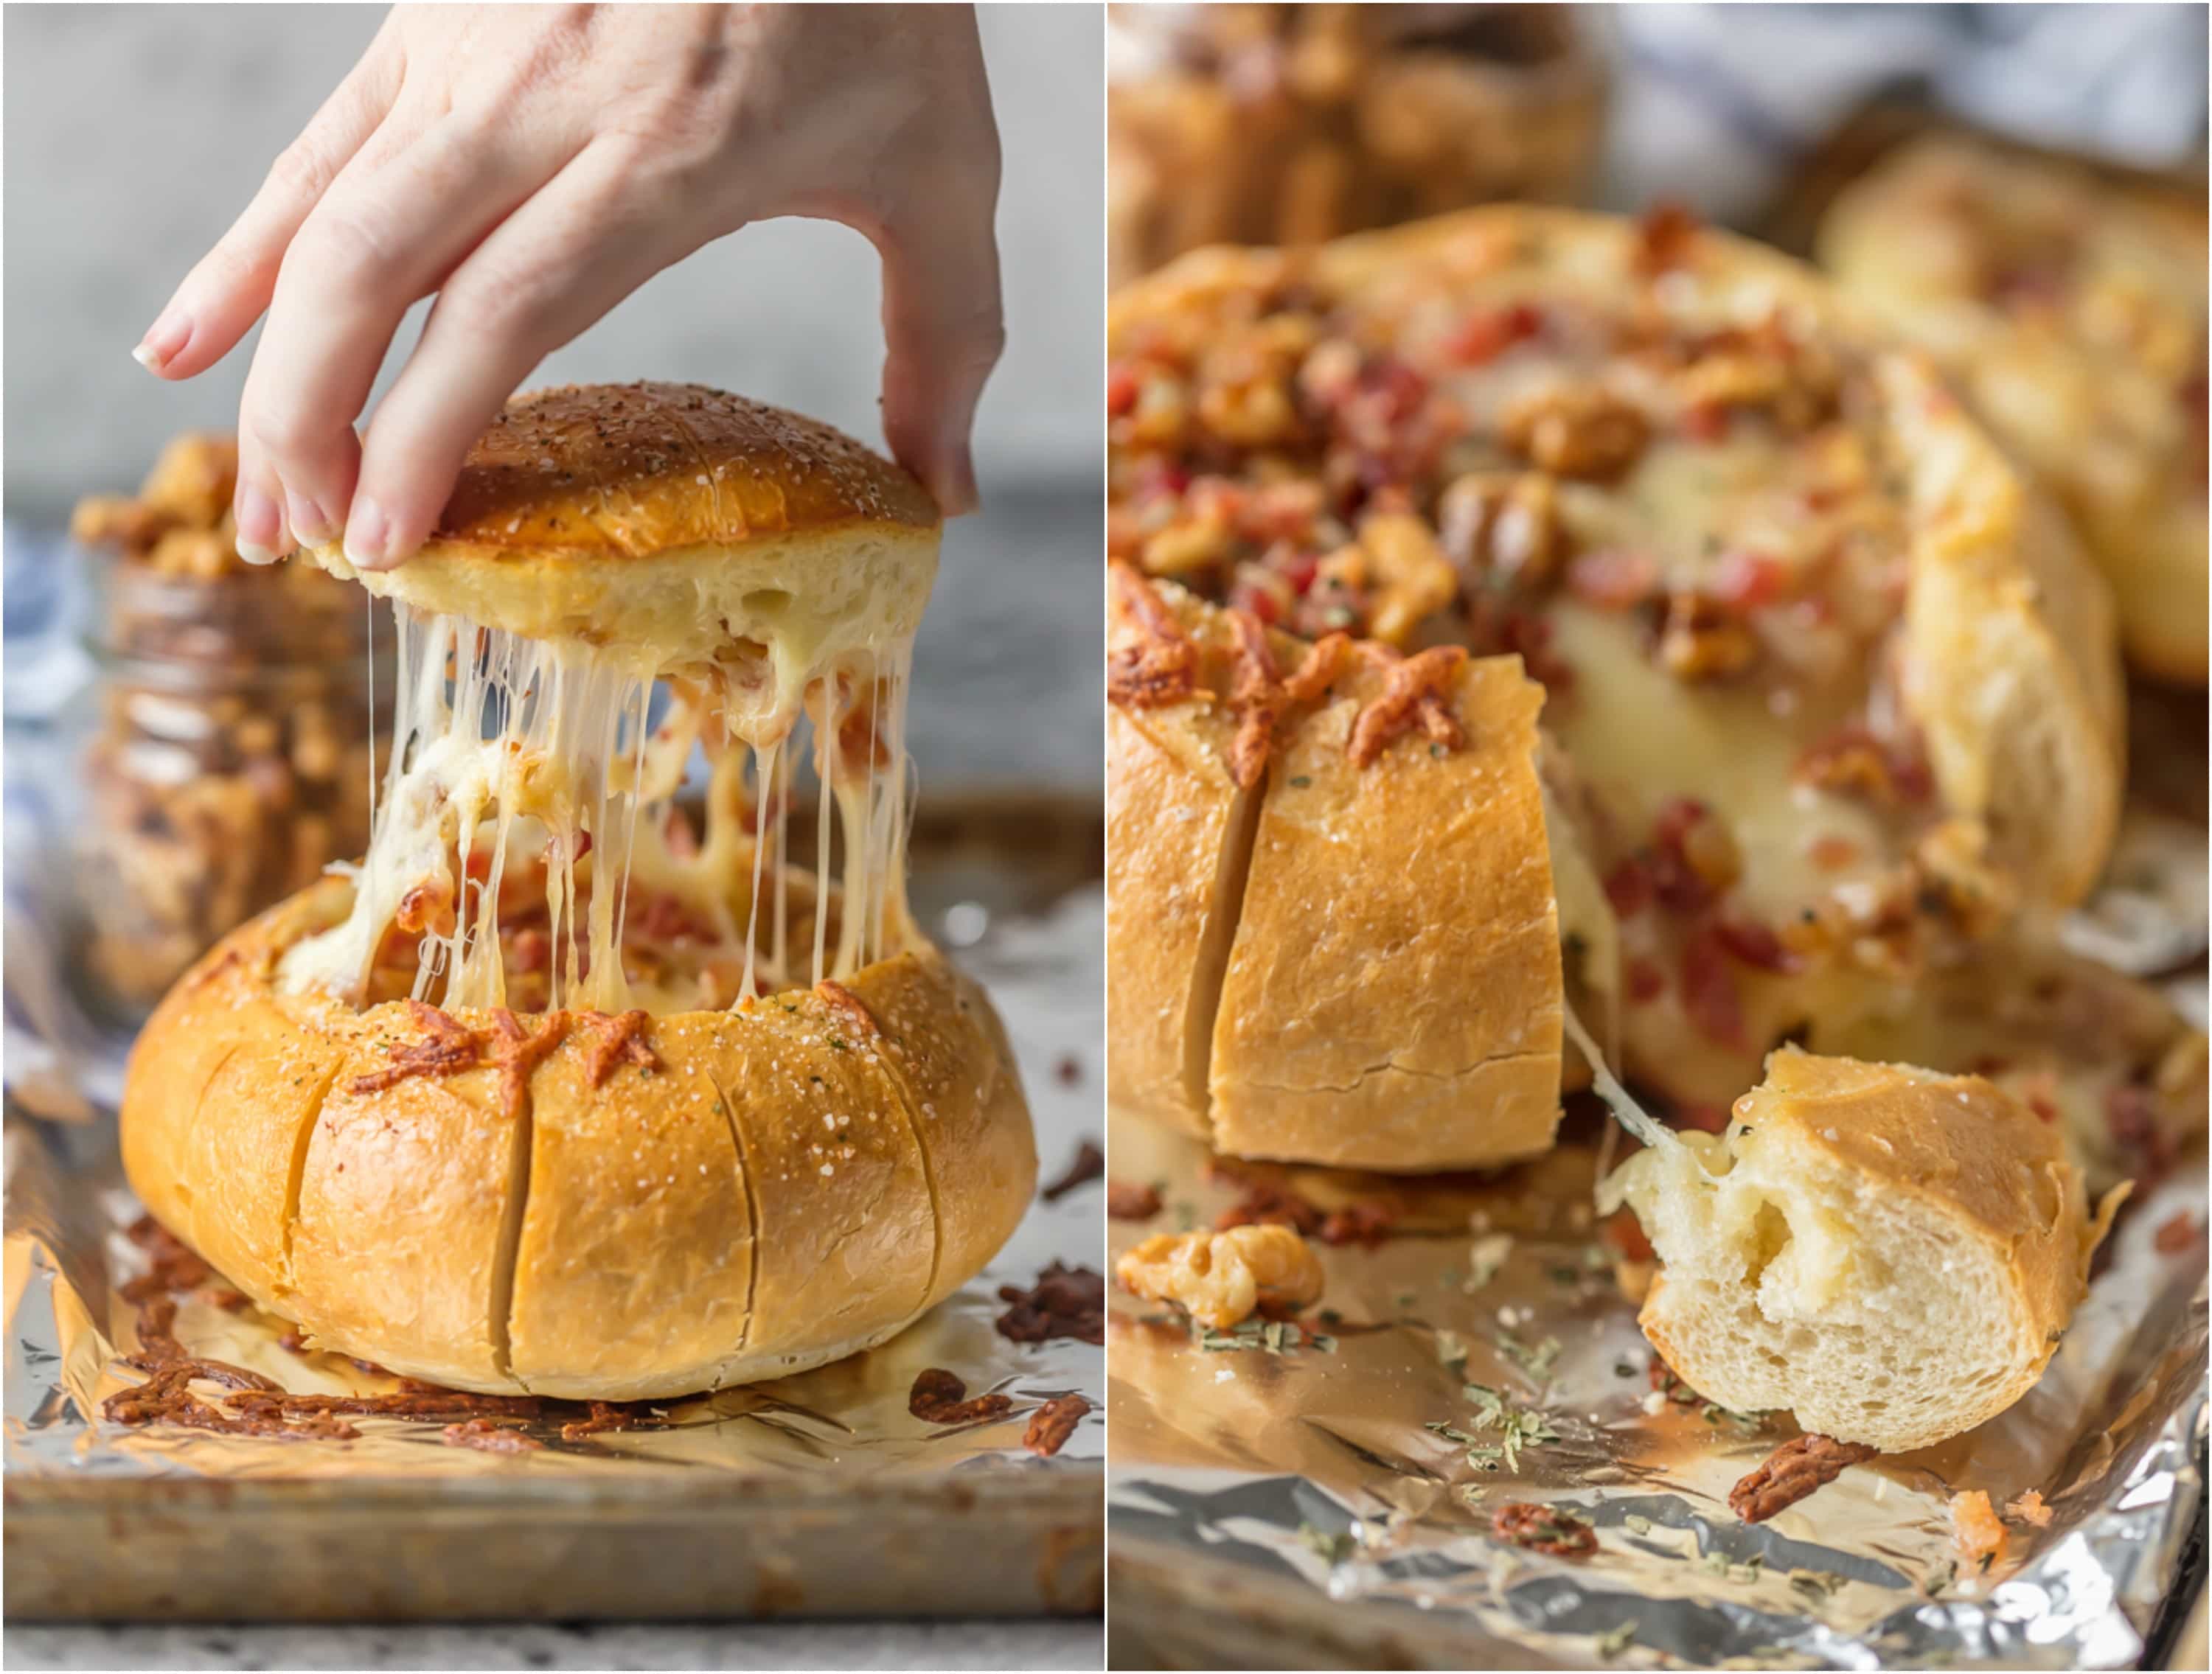 This Baked Brie Bread Bowl with Bacon and Candied Walnuts is A MUST at your holiday table! This Baked Brie Recipe is the ultimate holiday appetizer that all cheese lovers will devour! A Baked Brie Bowl loaded with candied walnuts and crispy bacon is SO easy and full of flavor. Best easy appetizer recipe!